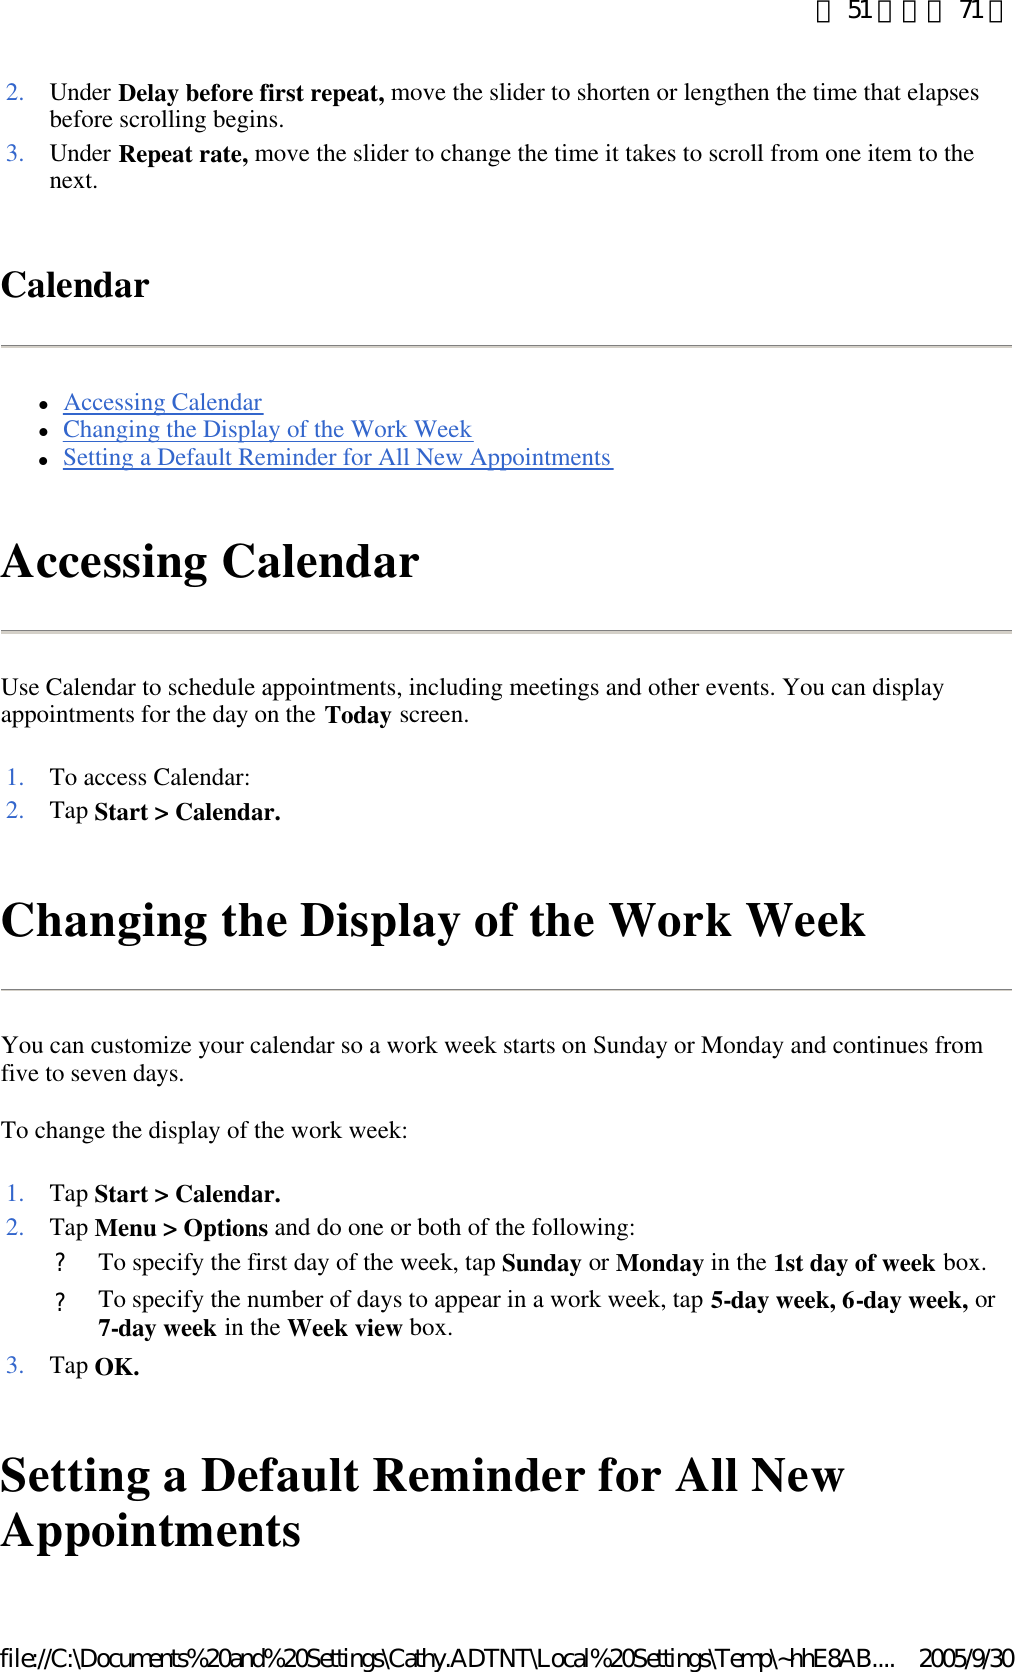 Calendar lAccessing Calendar  lChanging the Display of the Work Week  lSetting a Default Reminder for All New Appointments  Accessing Calendar Use Calendar to schedule appointments, including meetings and other events. You can display appointments for the day on the Today screen.  Changing the Display of the Work Week You can customize your calendar so a work week starts on Sunday or Monday and continues from five to seven days. To change the display of the work week: Setting a Default Reminder for All New Appointments 2. Under Delay before first repeat, move the slider to shorten or lengthen the time that elapses before scrolling begins. 3. Under Repeat rate, move the slider to change the time it takes to scroll from one item to the next. 1. To access Calendar:2. Tap Start &gt; Calendar.1. Tap Start &gt; Calendar.2. Tap Menu &gt; Options and do one or both of the following: ?To specify the first day of the week, tap Sunday or Monday in the 1st day of week box. ?To specify the number of days to appear in a work week, tap 5-day week, 6-day week, or 7-day week in the Week view box. 3. Tap OK.第 51 頁，共 71 頁2005/9/30file://C:\Documents%20and%20Settings\Cathy.ADTNT\Local%20Settings\Temp\~hhE8AB....